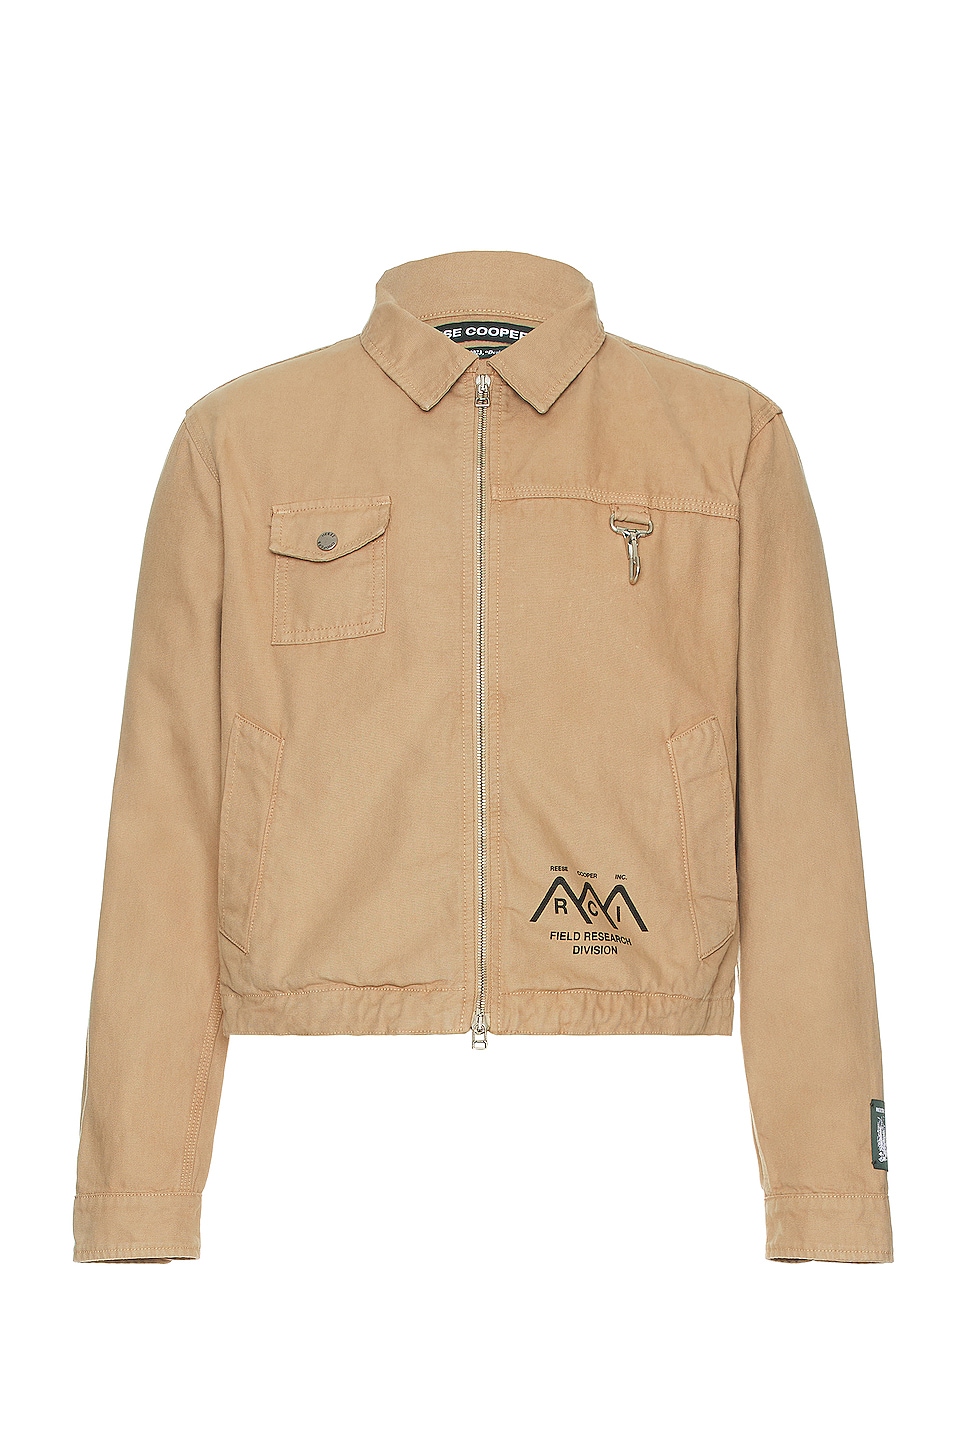 Image 1 of Reese Cooper Research Division Garment Dyed Work Jacket in Khaki